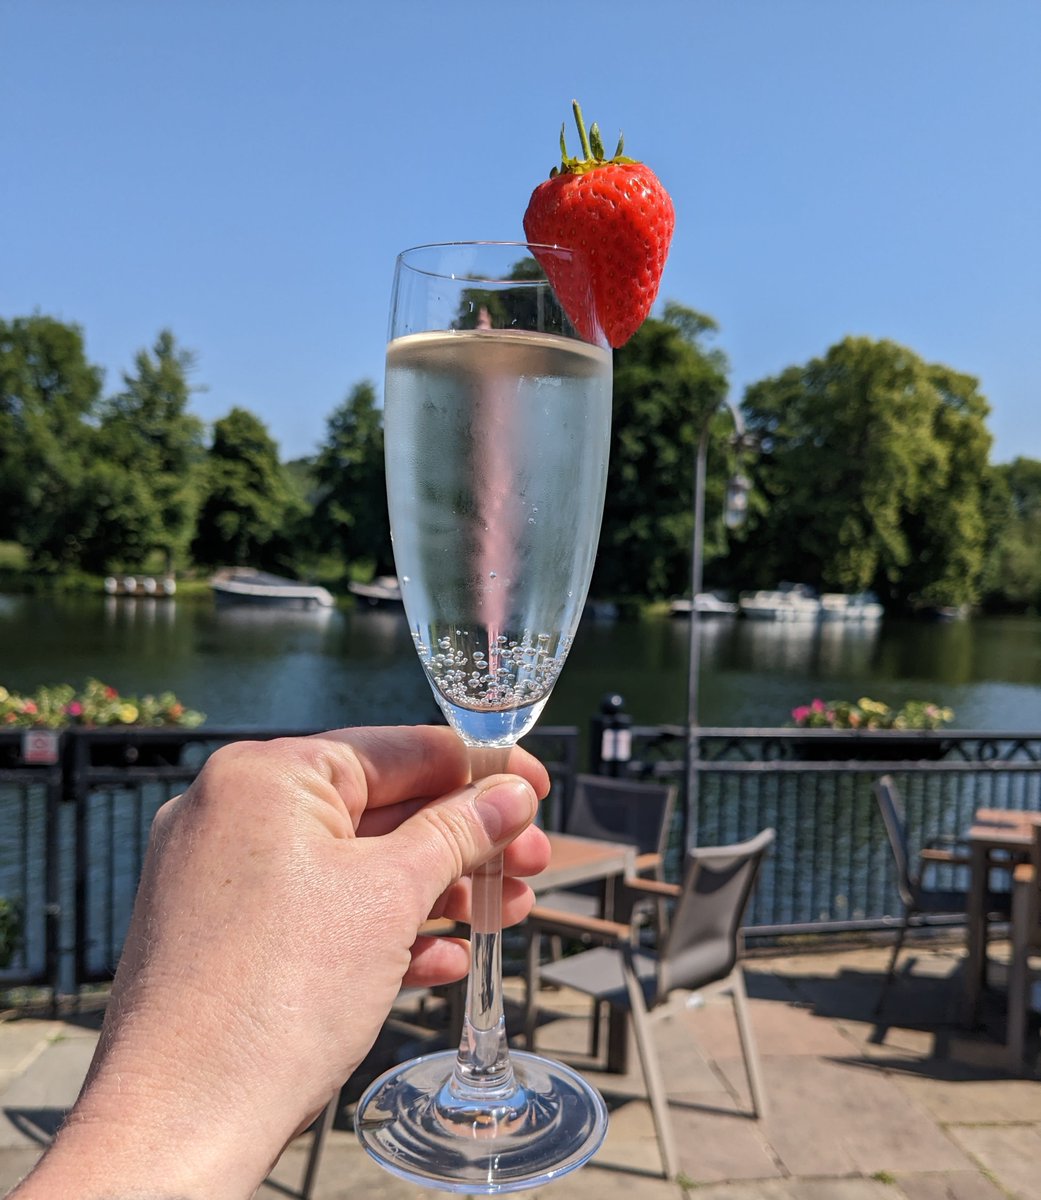 Cheers to Fizz Friday😉 Sit back relax and enjoy the views 😁 #friday #fridayfeeling #fridayvibes #fridaymood #fizzfriday #cheers #prosecco #proseccolovers #proseccotime #winelovers #friends #drink #relax #sparklingwine #riverside #riverterrace